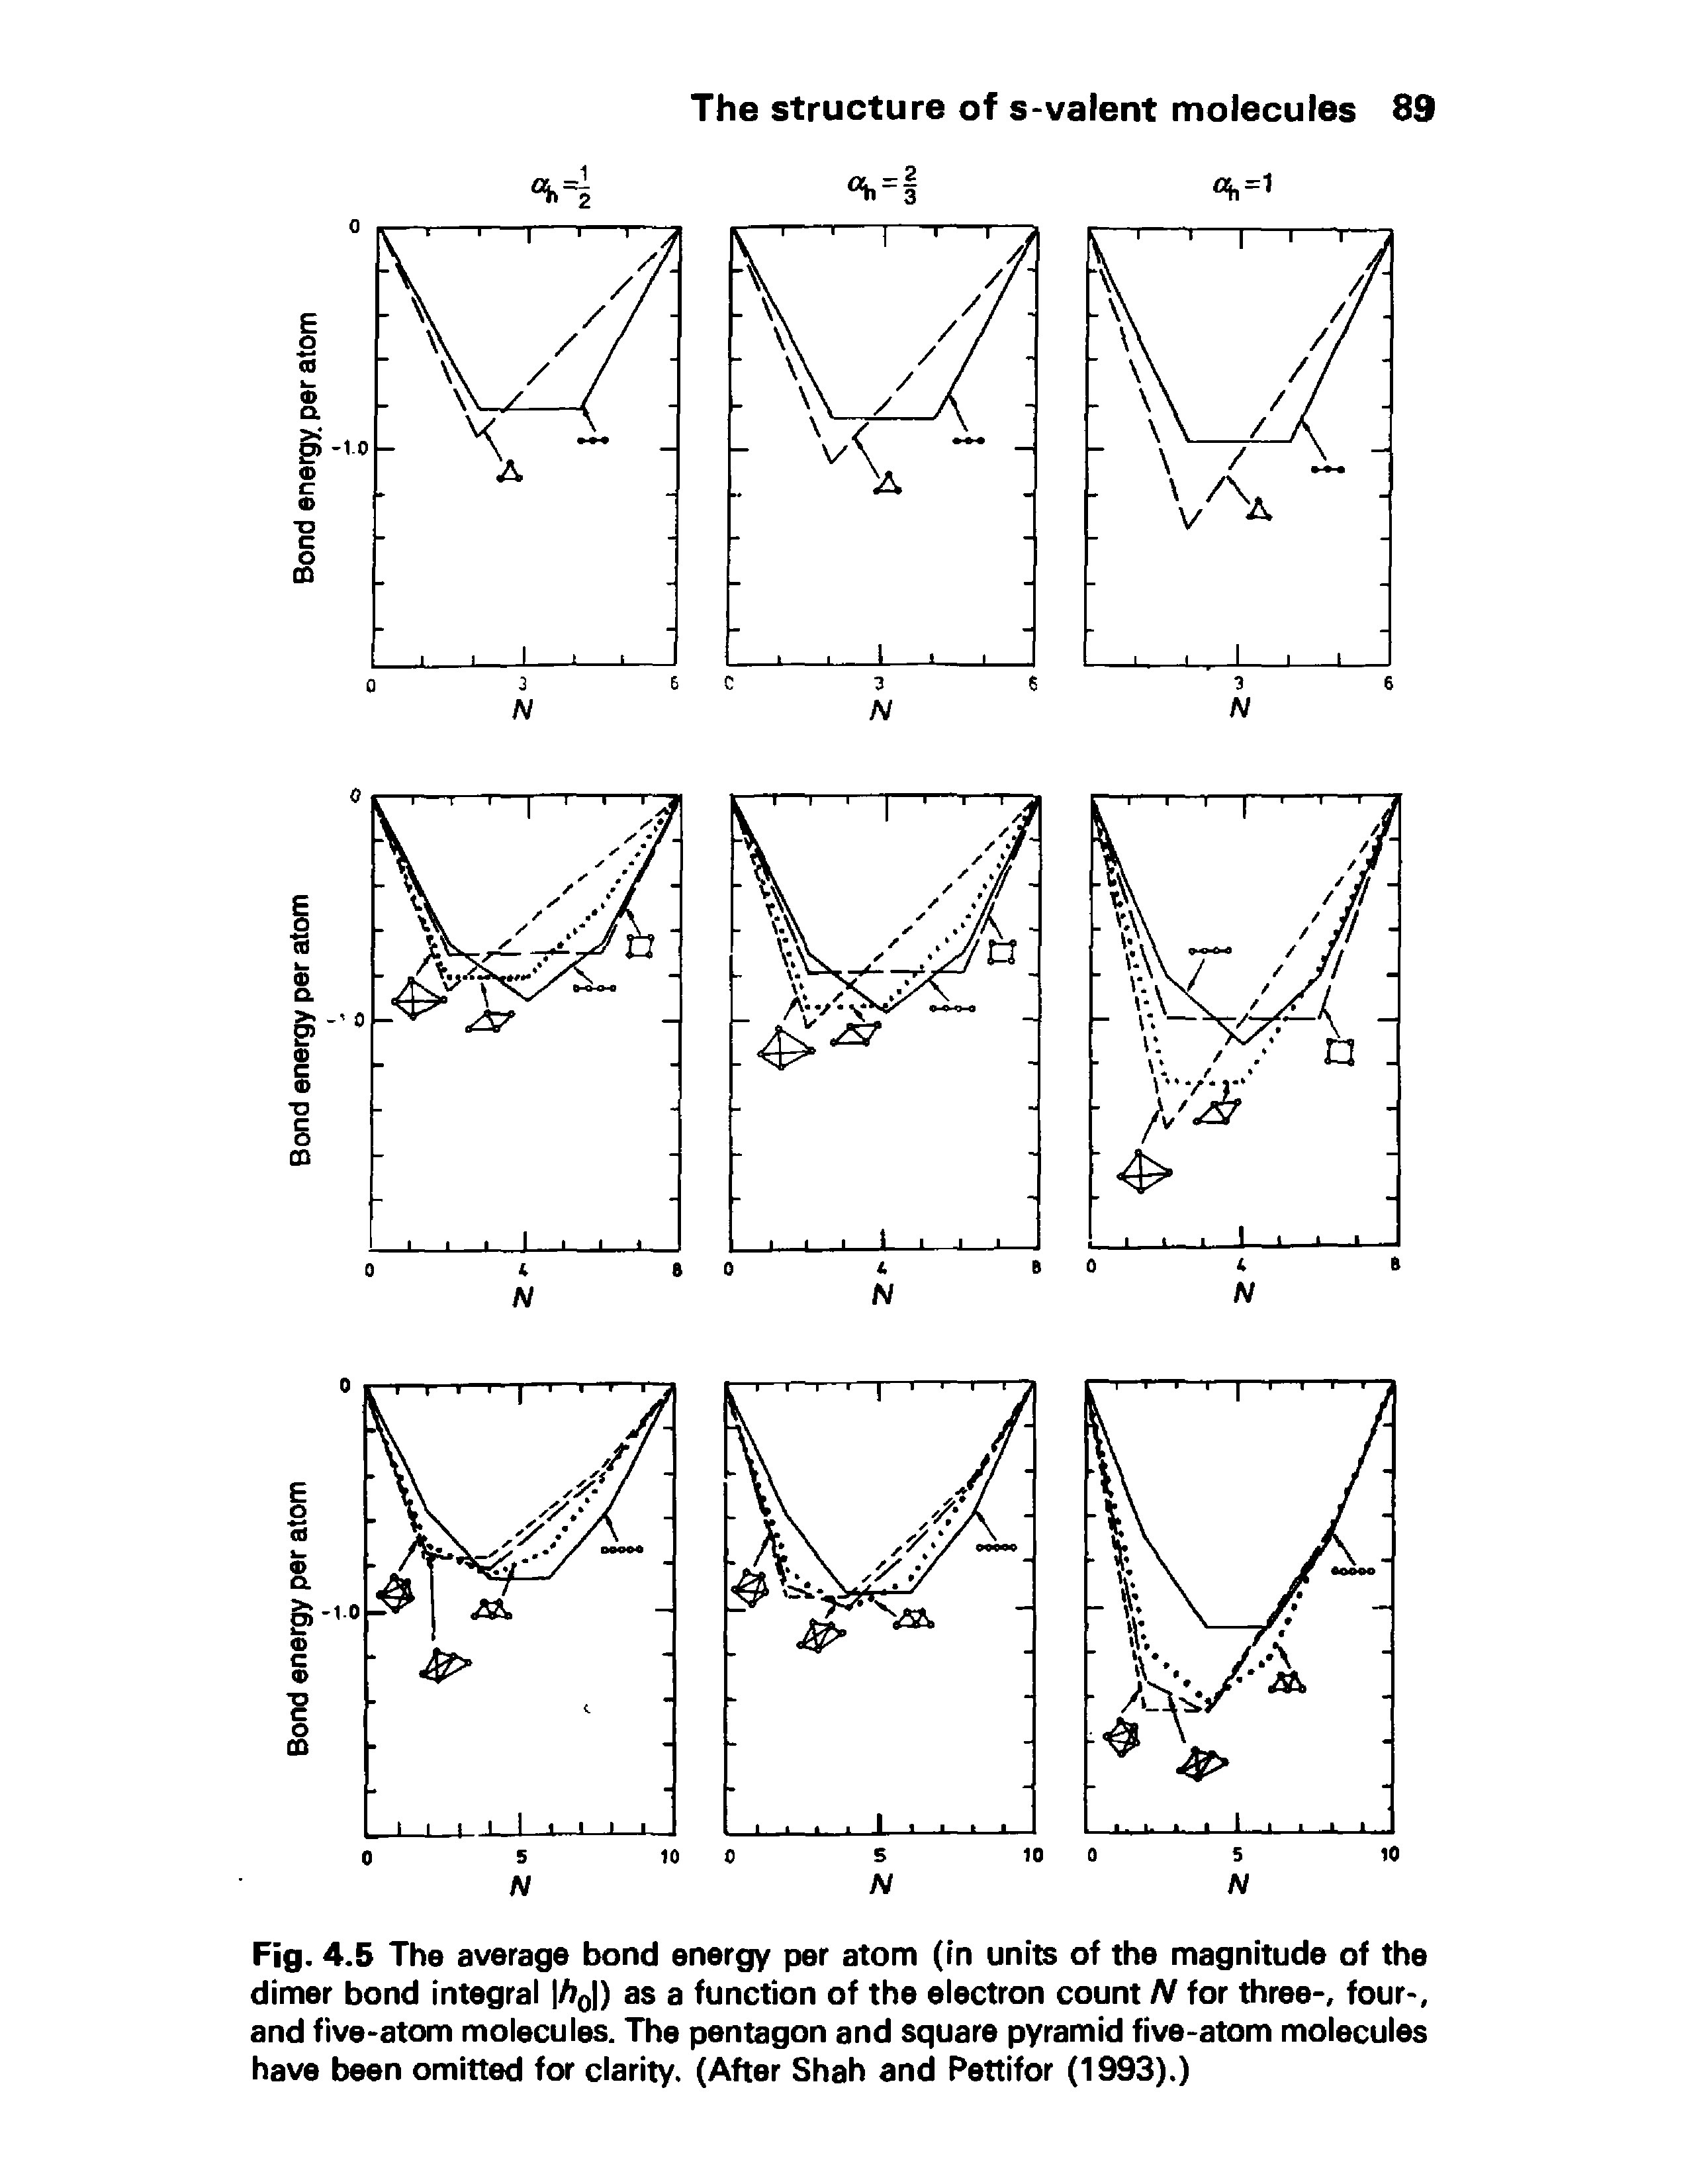 Fig. 4.5 The average bond energy per atom (in units of the magnitude of the dimer bond integral 0 ) as a function of the electron count N for three-, four-, and five-atom molecules. The pentagon and square pyramid five-atom molecules have been omitted for clarity. (After Shah and Pettifor (1993).)...